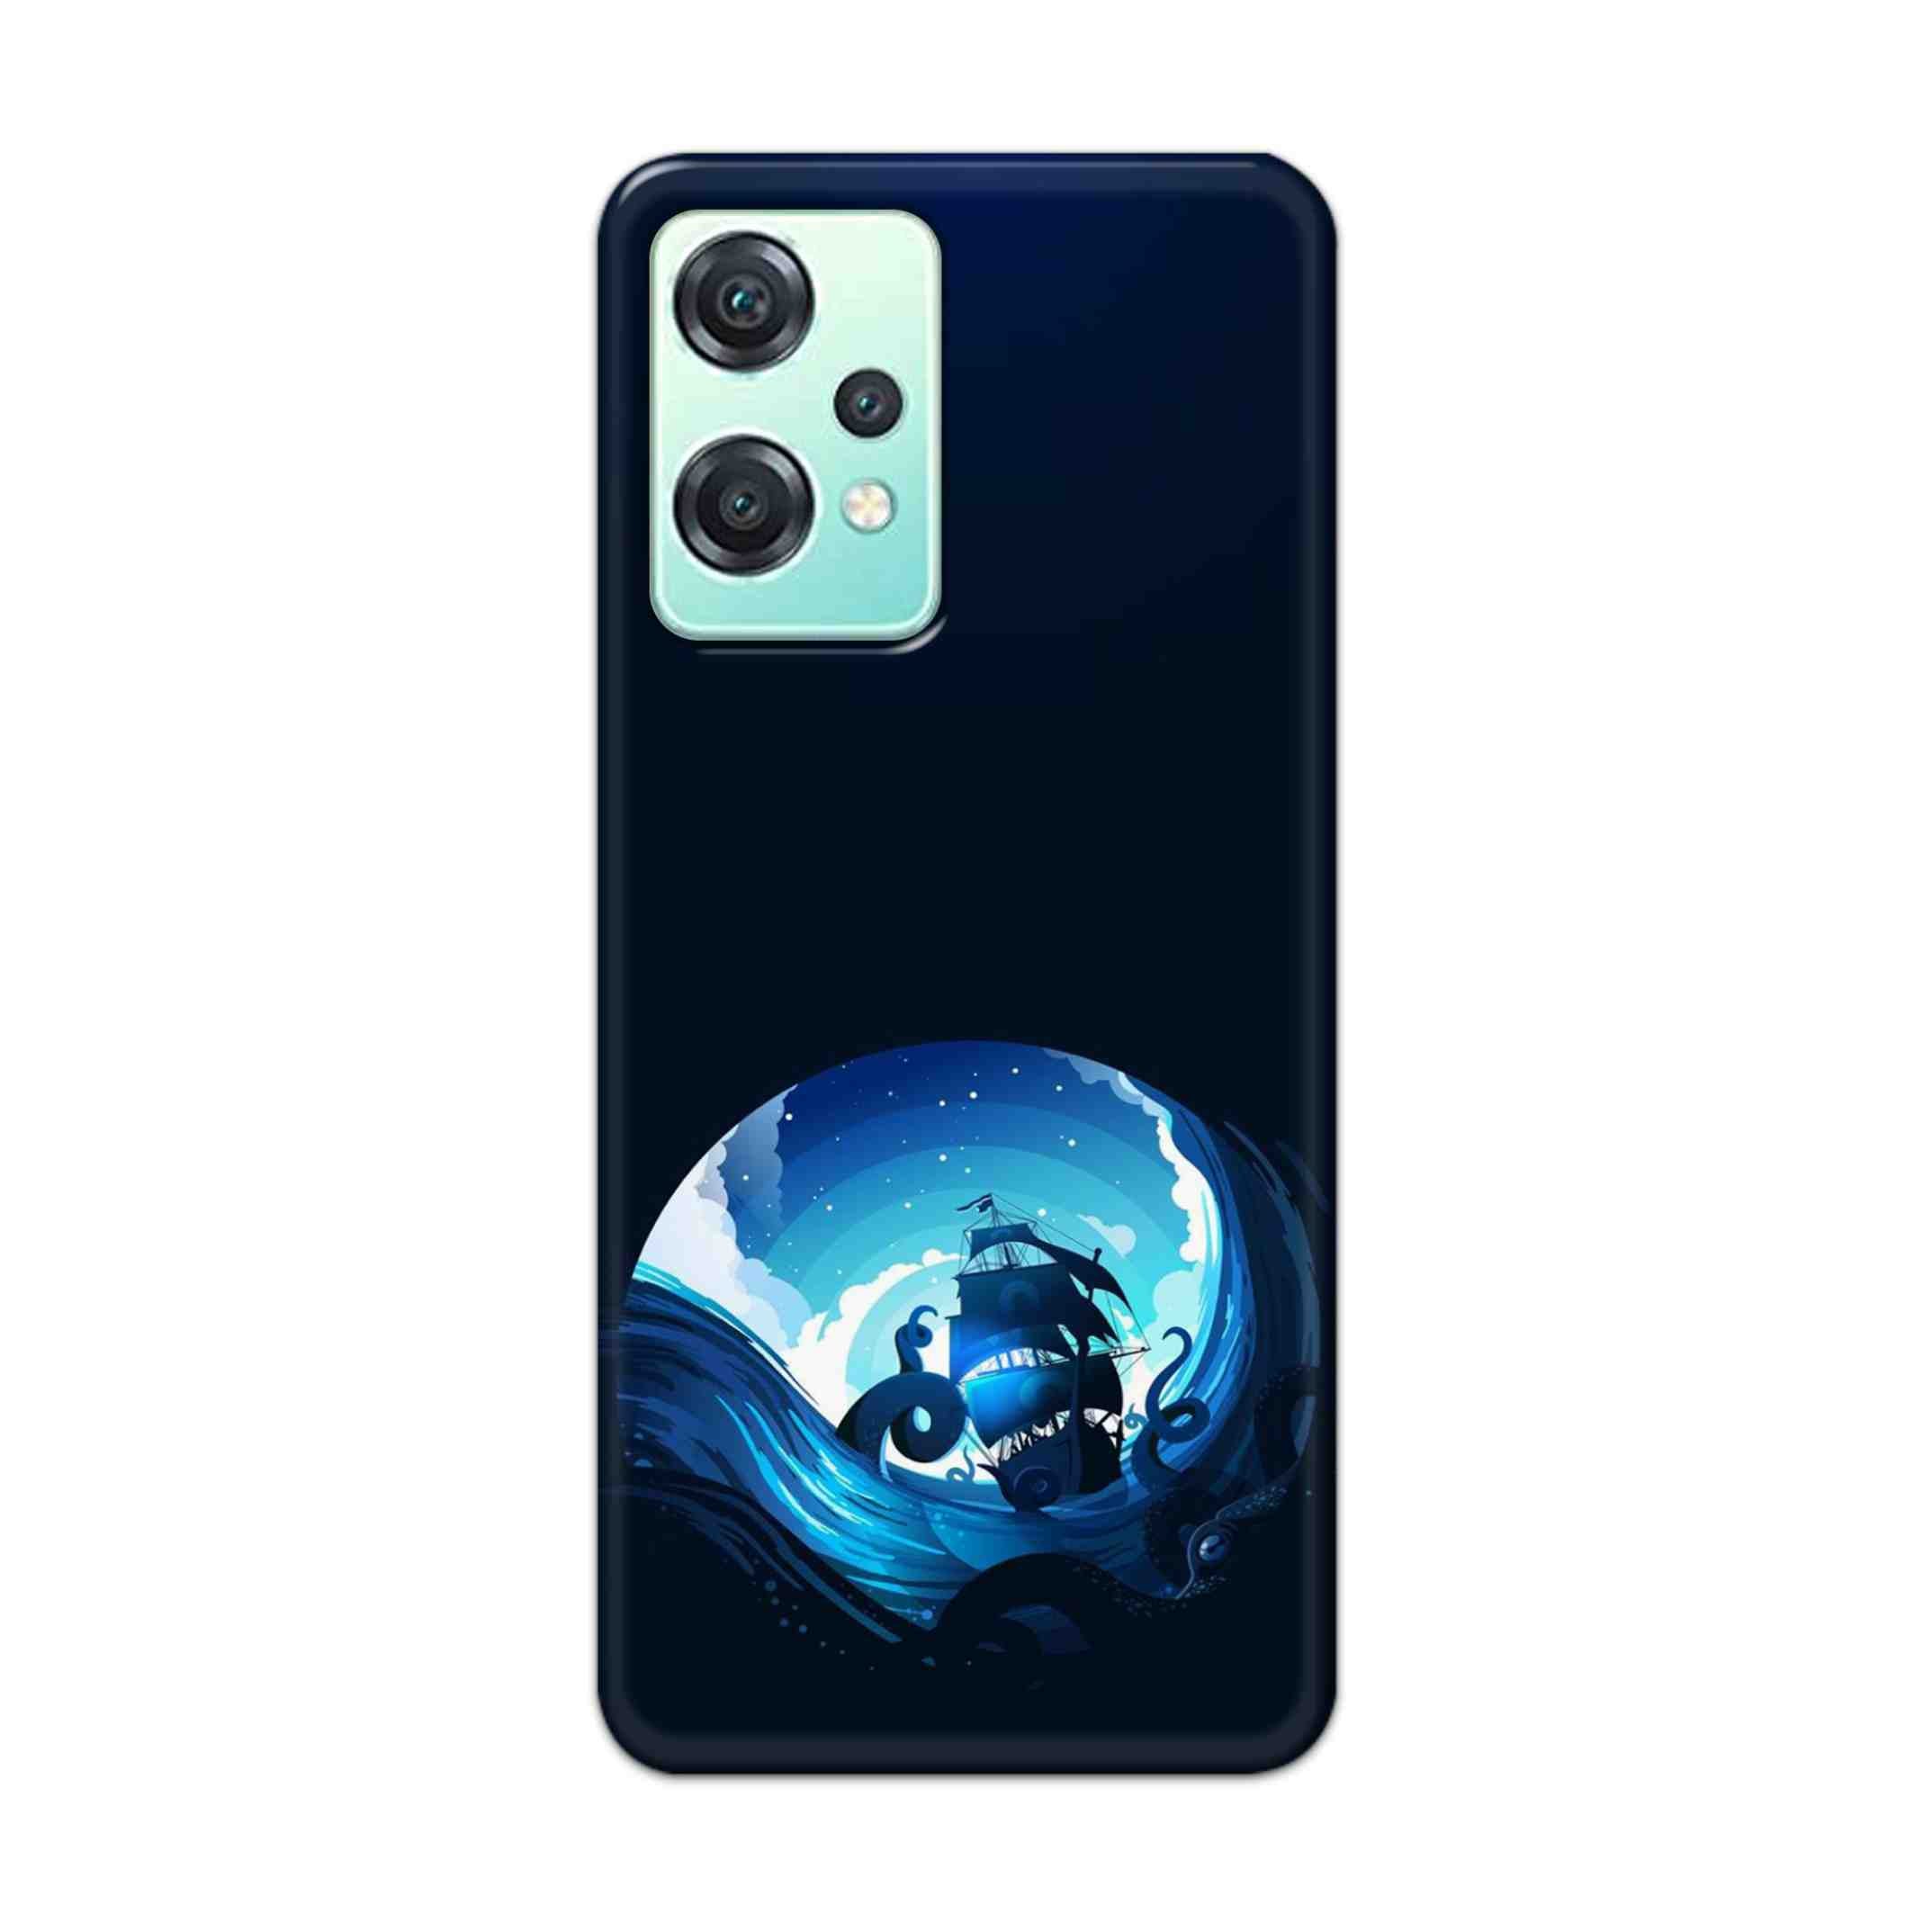 Buy Blue Sea Ship Hard Back Mobile Phone Case Cover For OnePlus Nord CE 2 Lite 5G Online